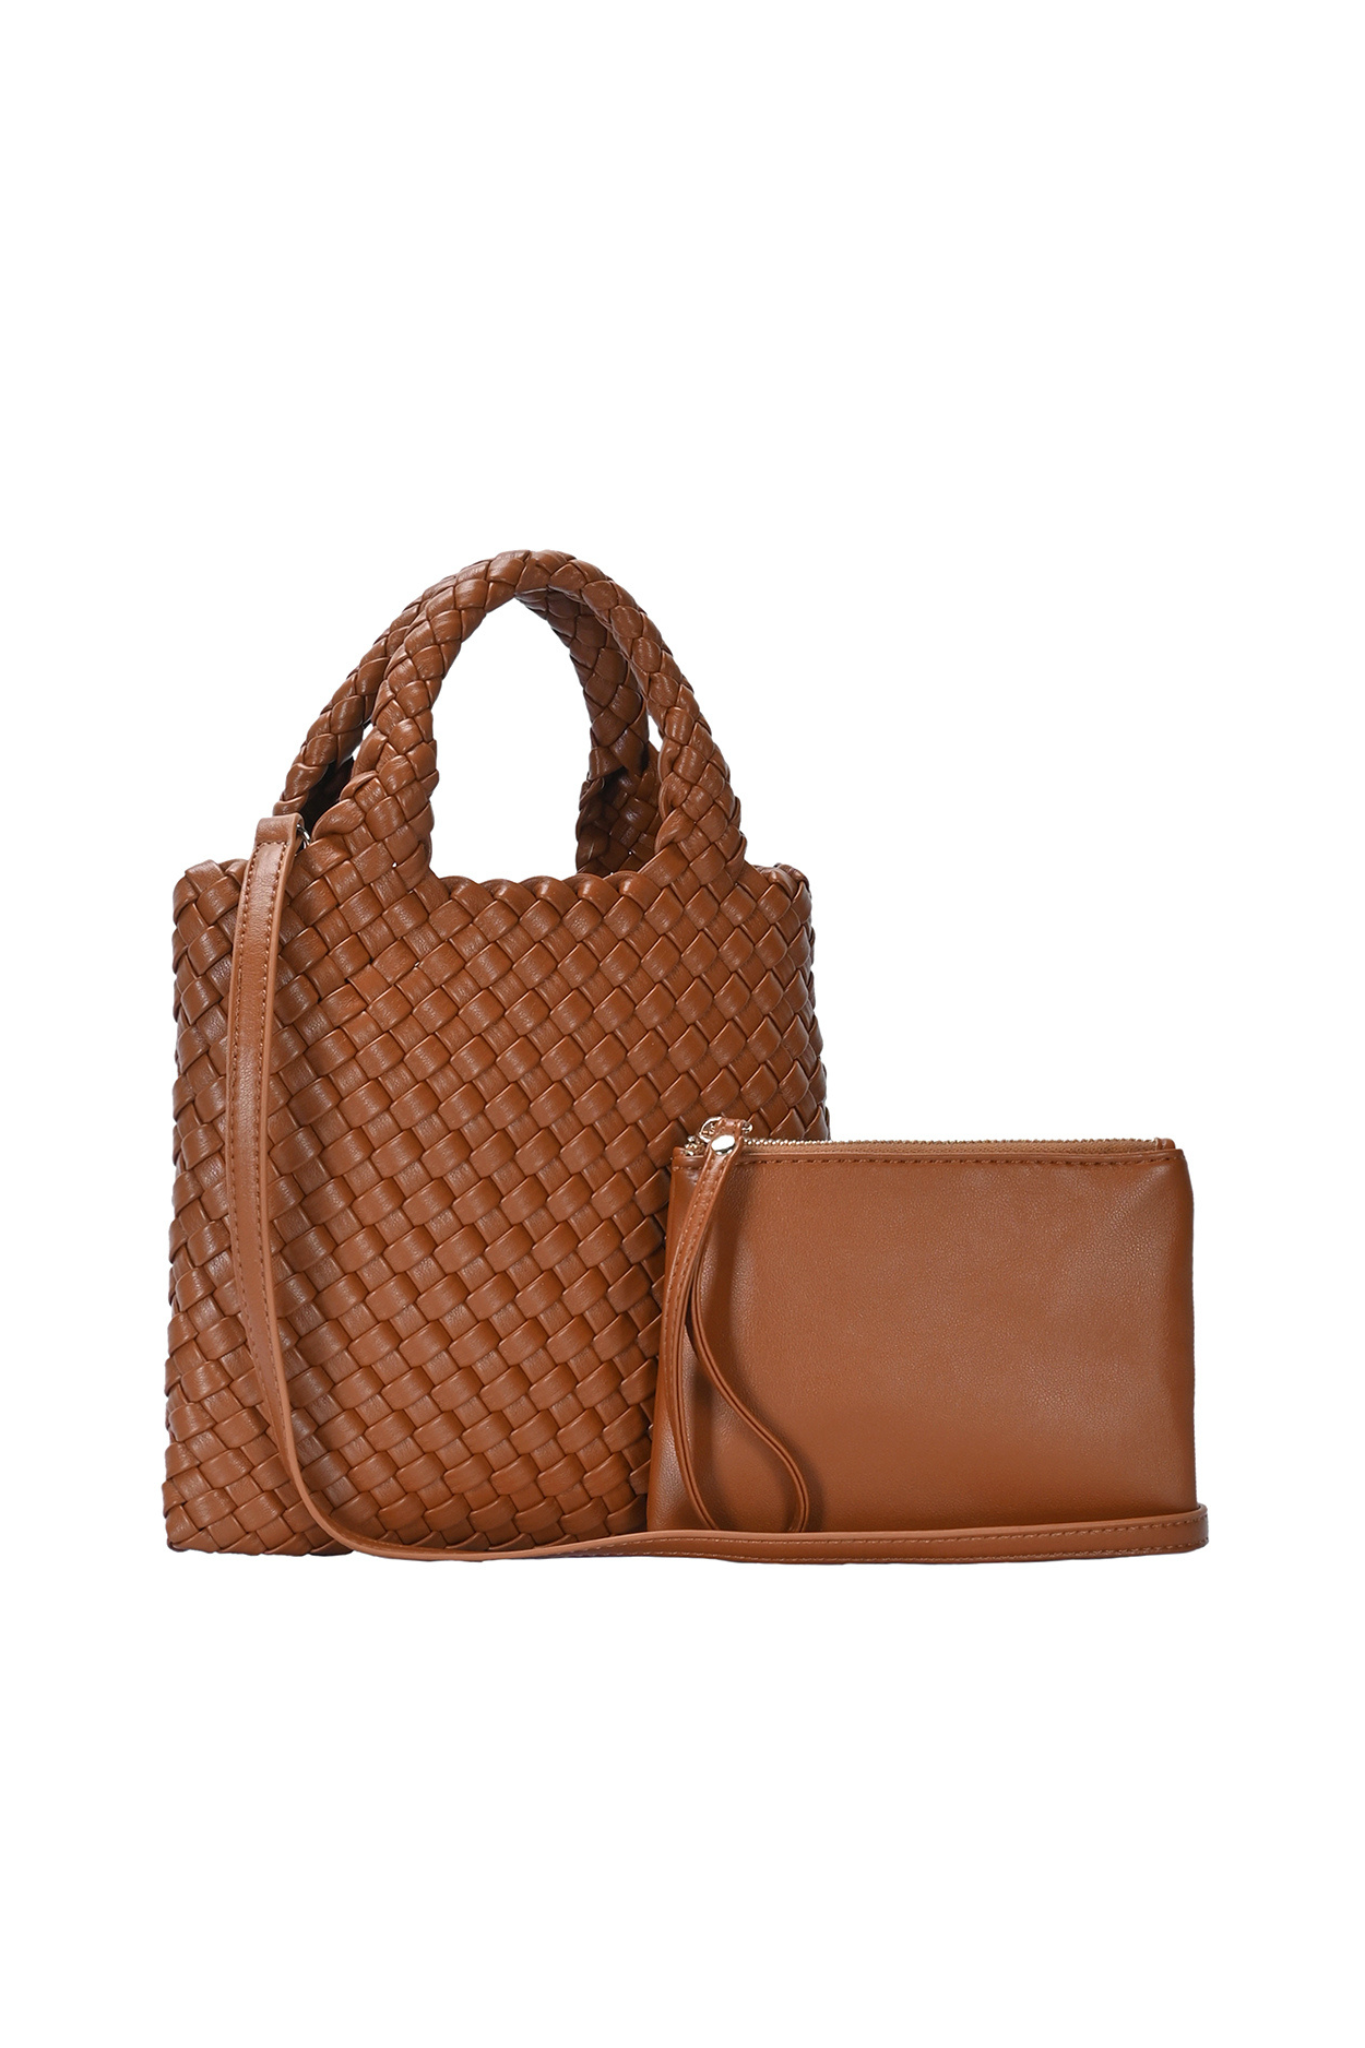 2 in 1 Woven Handle Tote Bag with Clutch Set in Camel_Angle